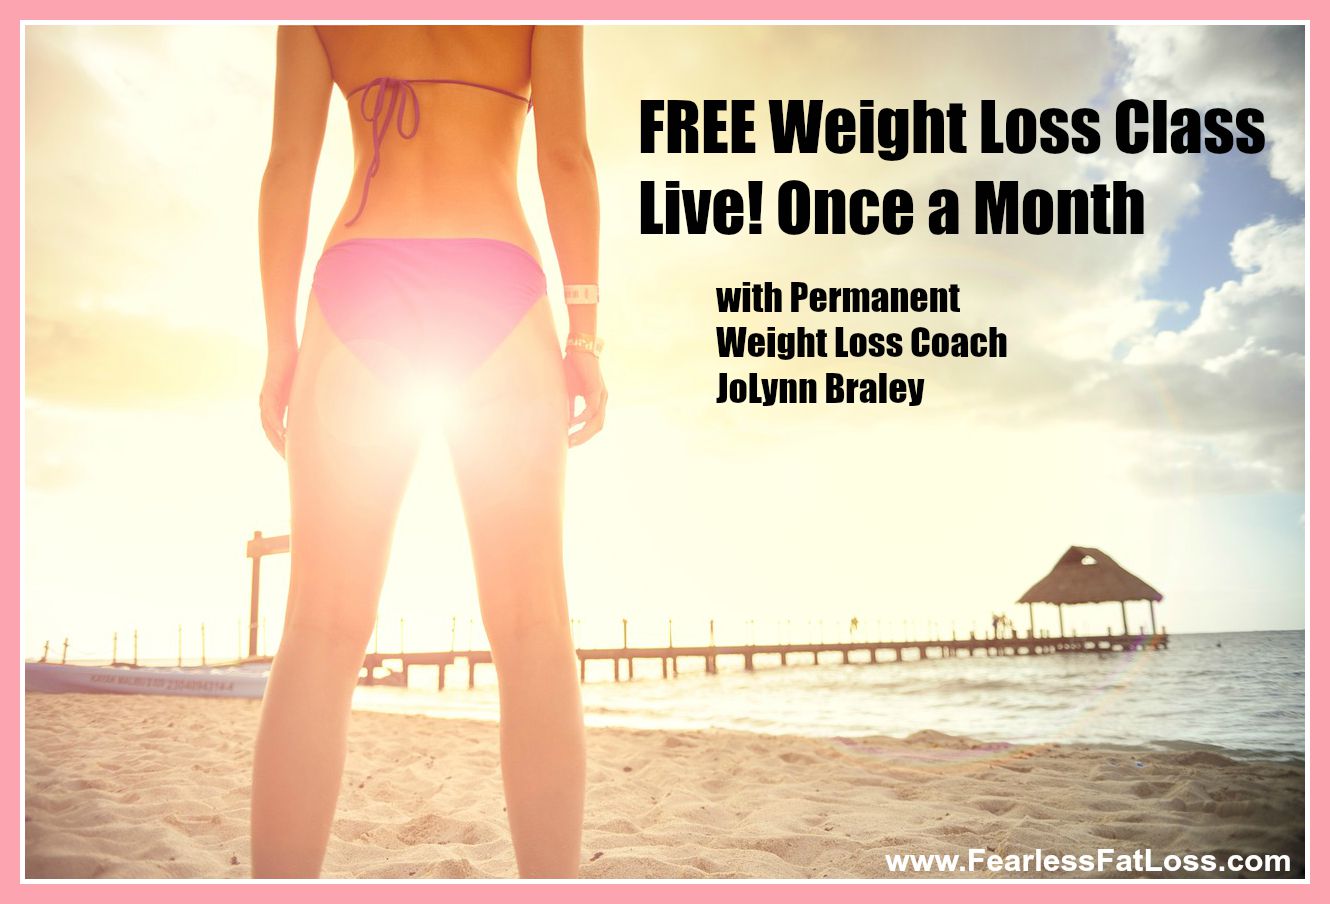 Free Weight Loss Class LIVE Once a Month!